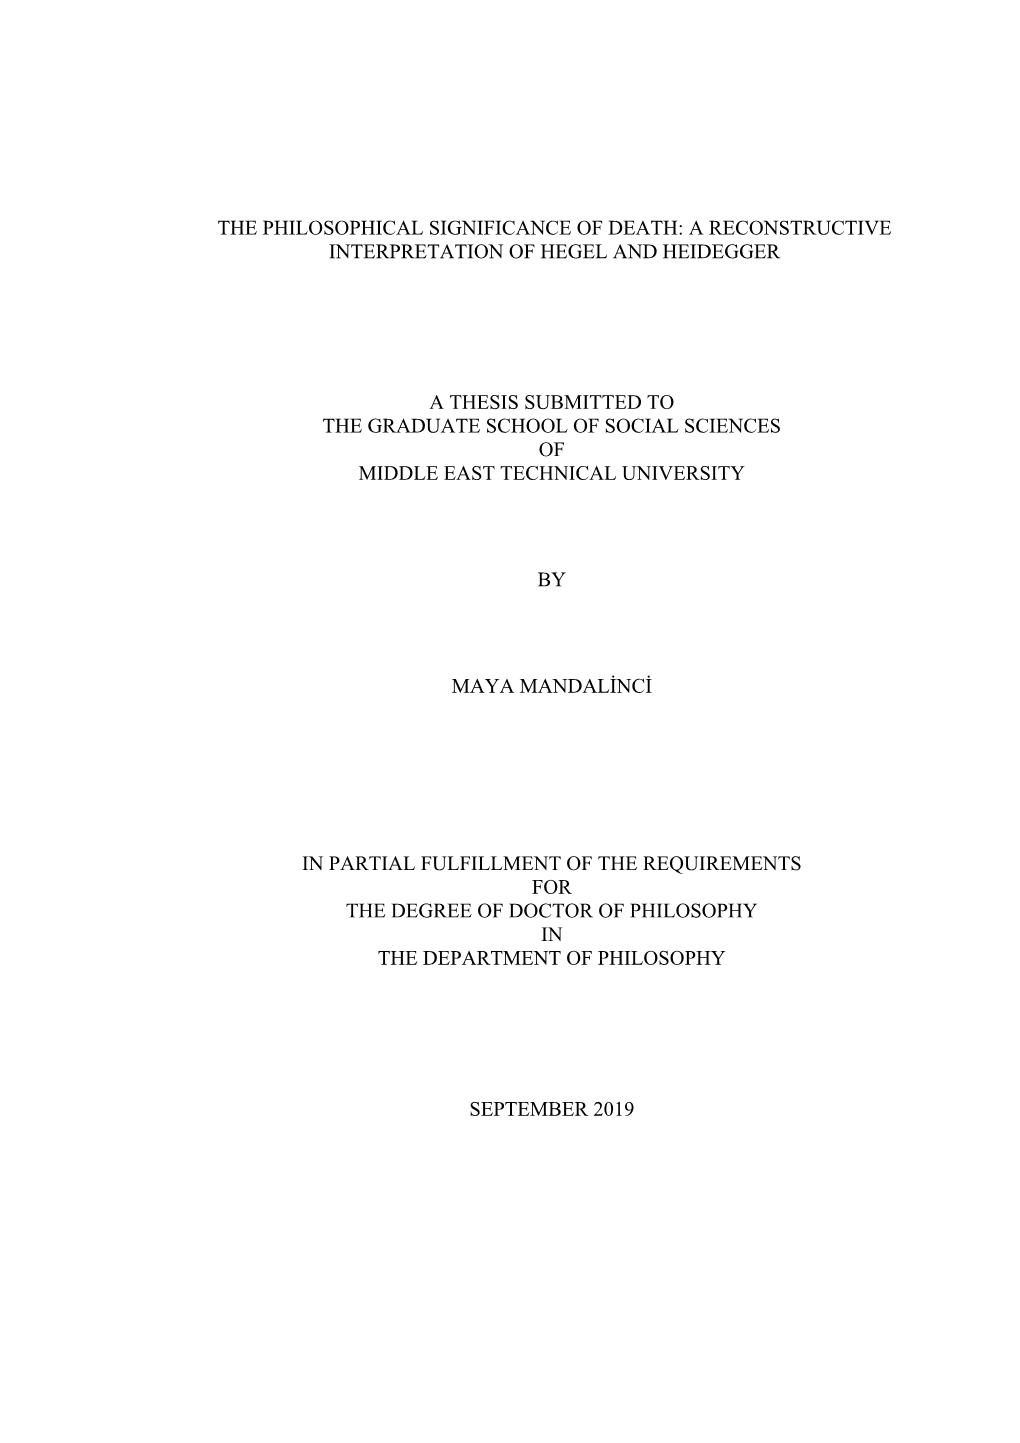 The Philosophical Significance of Death: a Reconstructive Interpretation of Hegel and Heidegger a Thesis Submitted to the Gradua